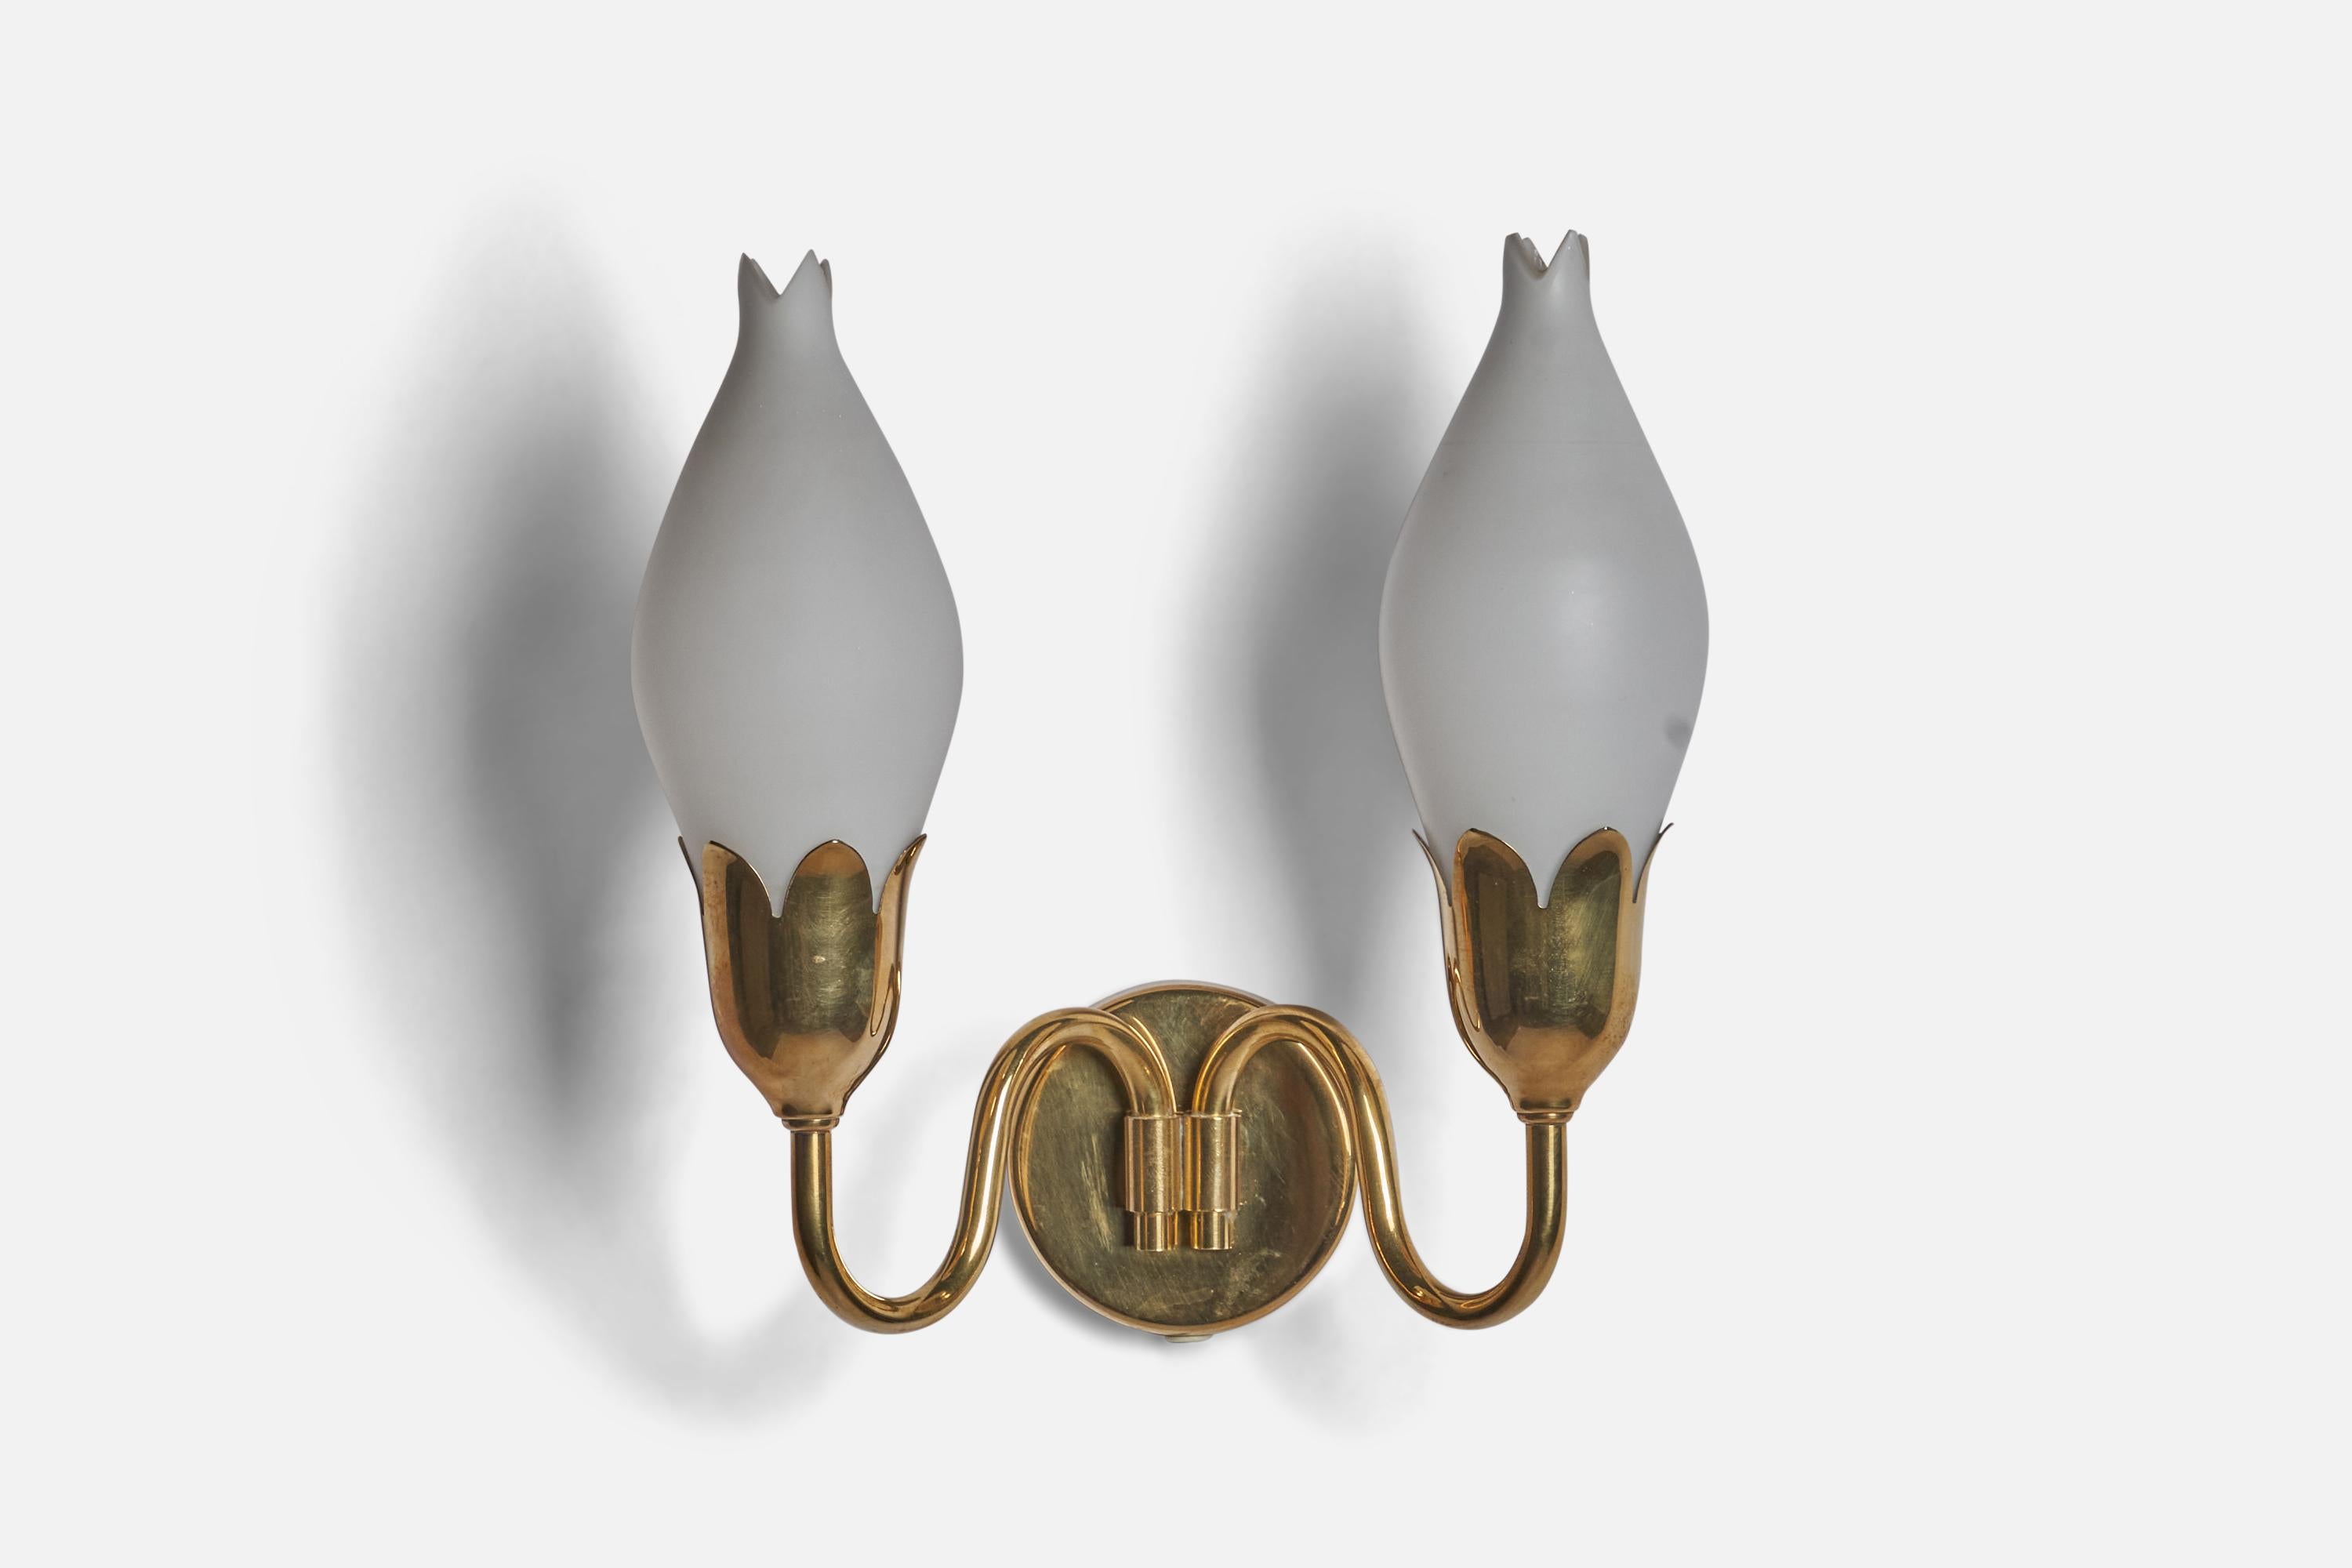 A two-armed brass and glass wall light designed and produced by 
Fog & Mørup, Denmark, c. 1950s.

Overall Dimensions (inches): 11” H x 10” W x 6” D
Bulb Specifications: E-14 Bulb
Number of Sockets: 2
All lighting will be converted for US usage. We